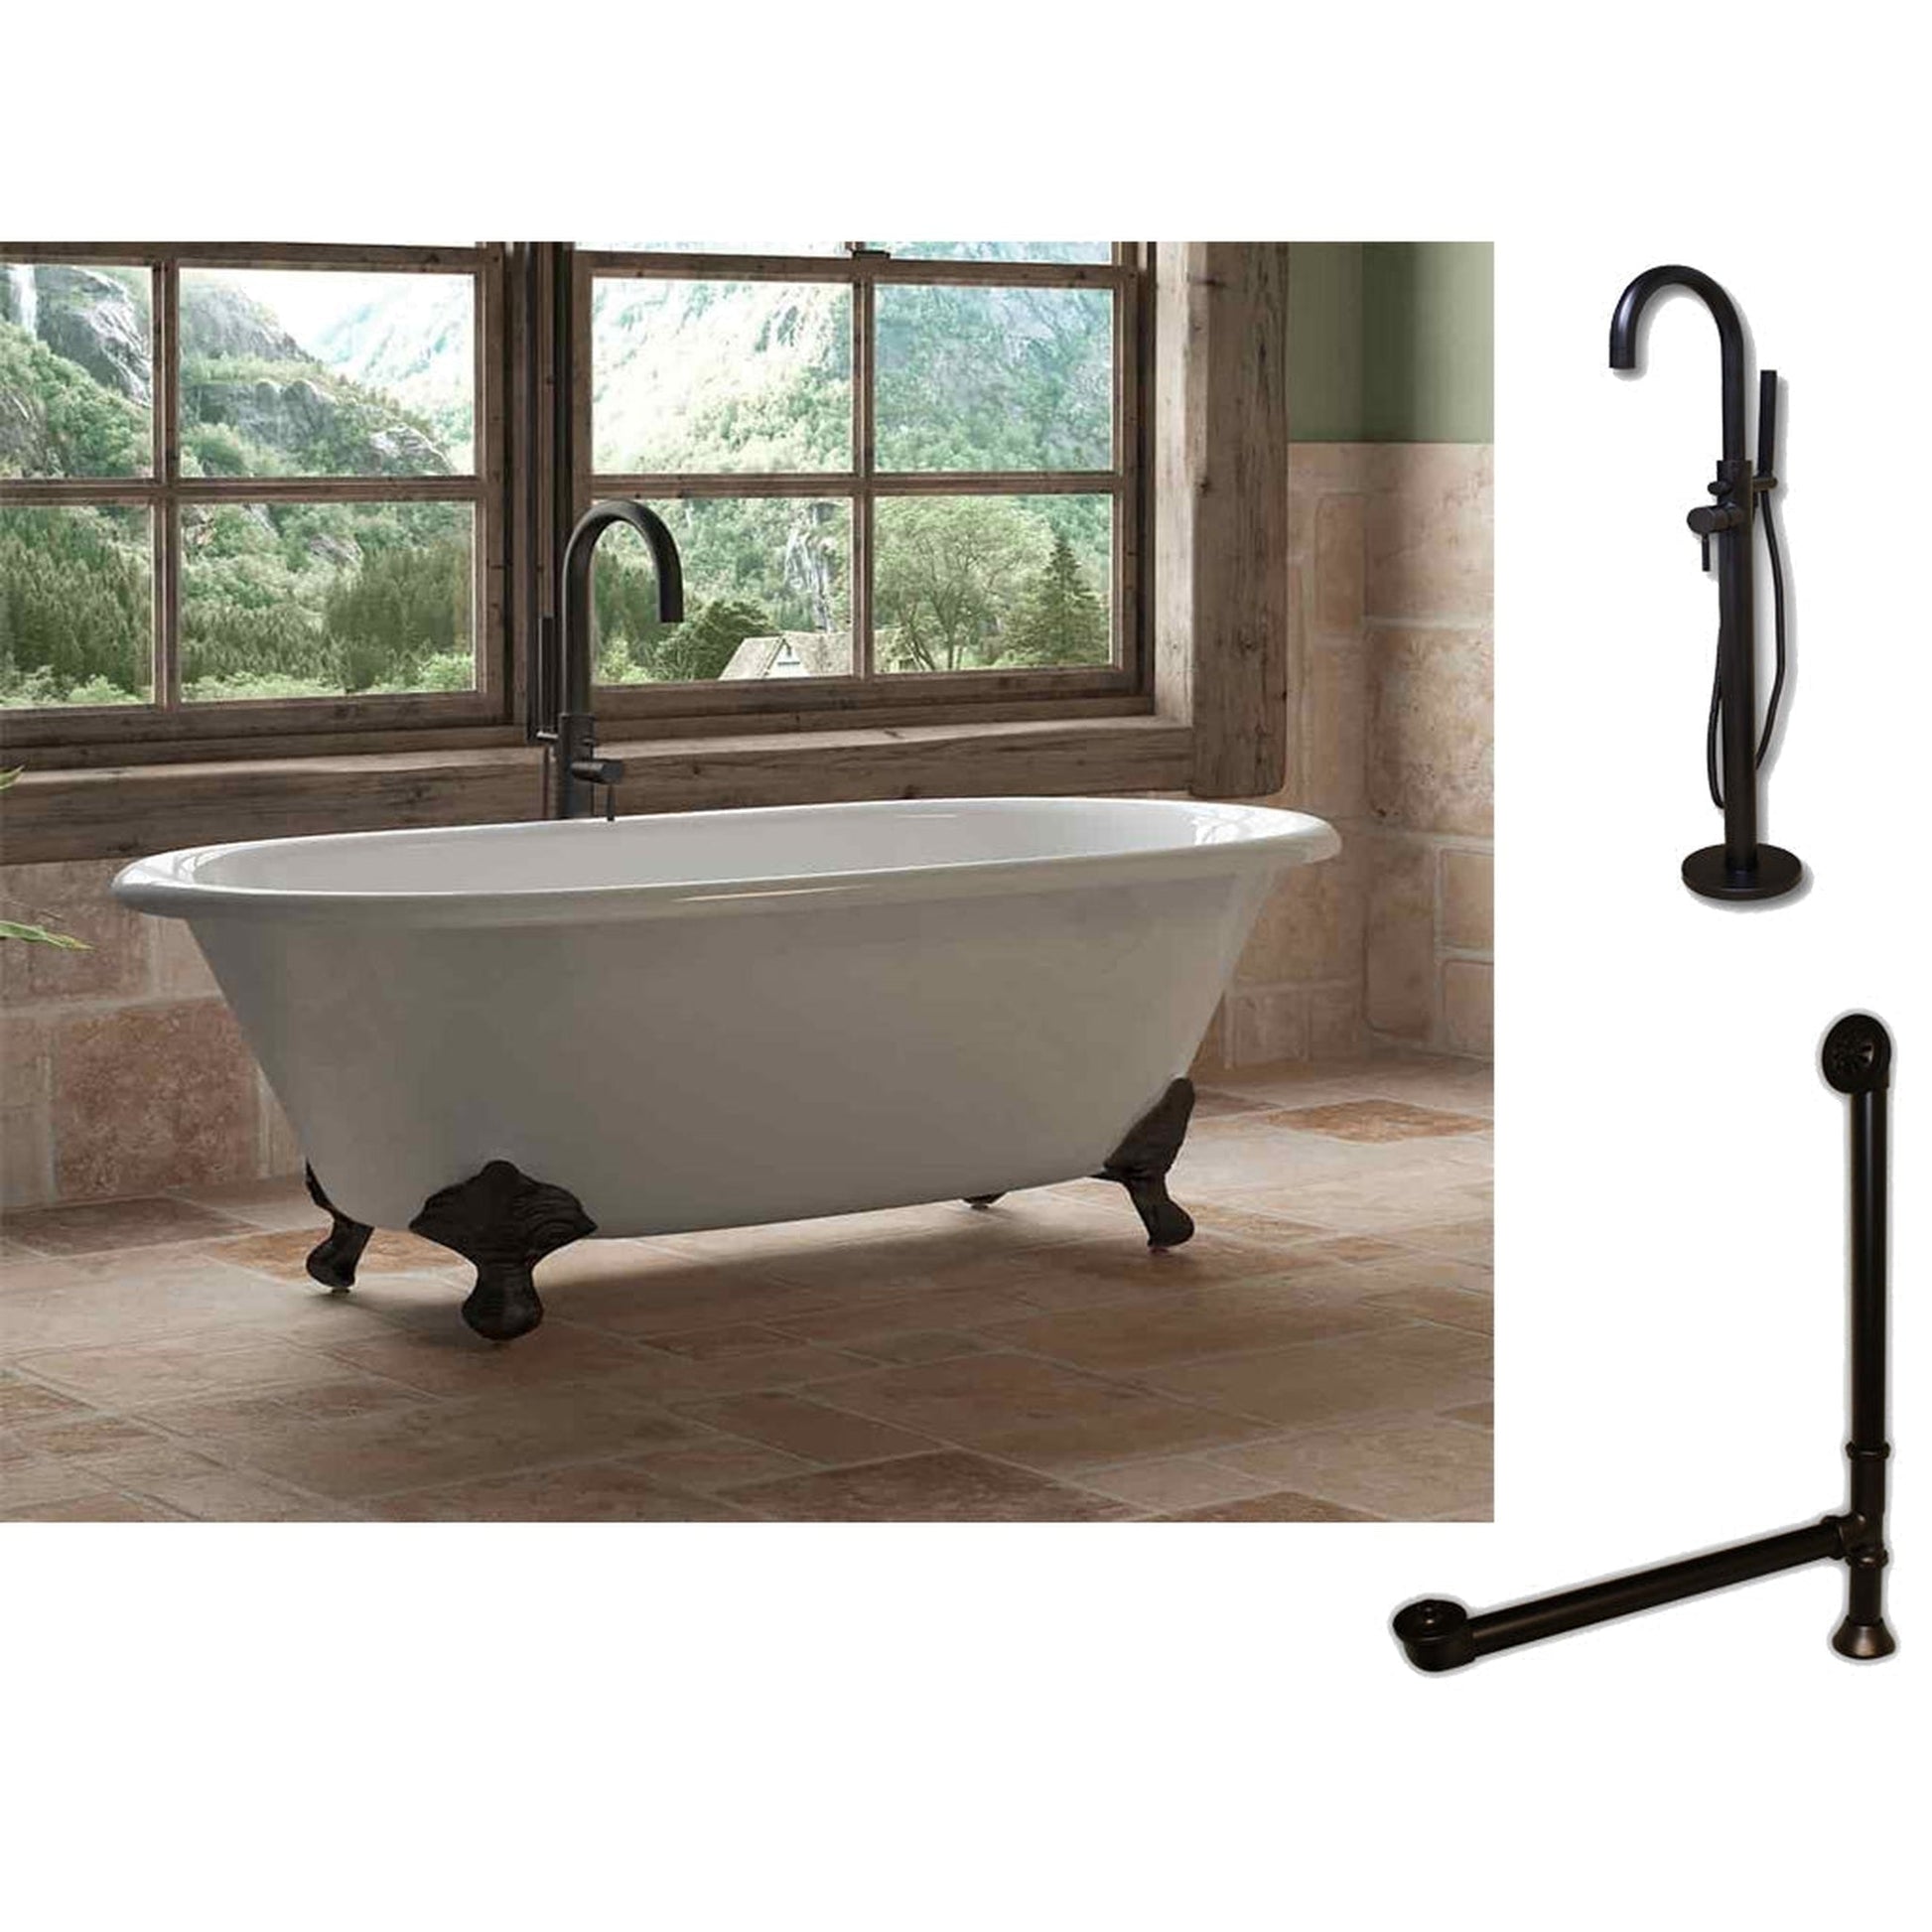 Cambridge Plumbing 60" White Cast Iron Double Ended Clawfoot Bathtub With No Deck Holes And Complete Plumbing Package Including Freestanding Floor Mounted Faucet, Drain And Overflow Assembly In Oil Rubbed Bronze